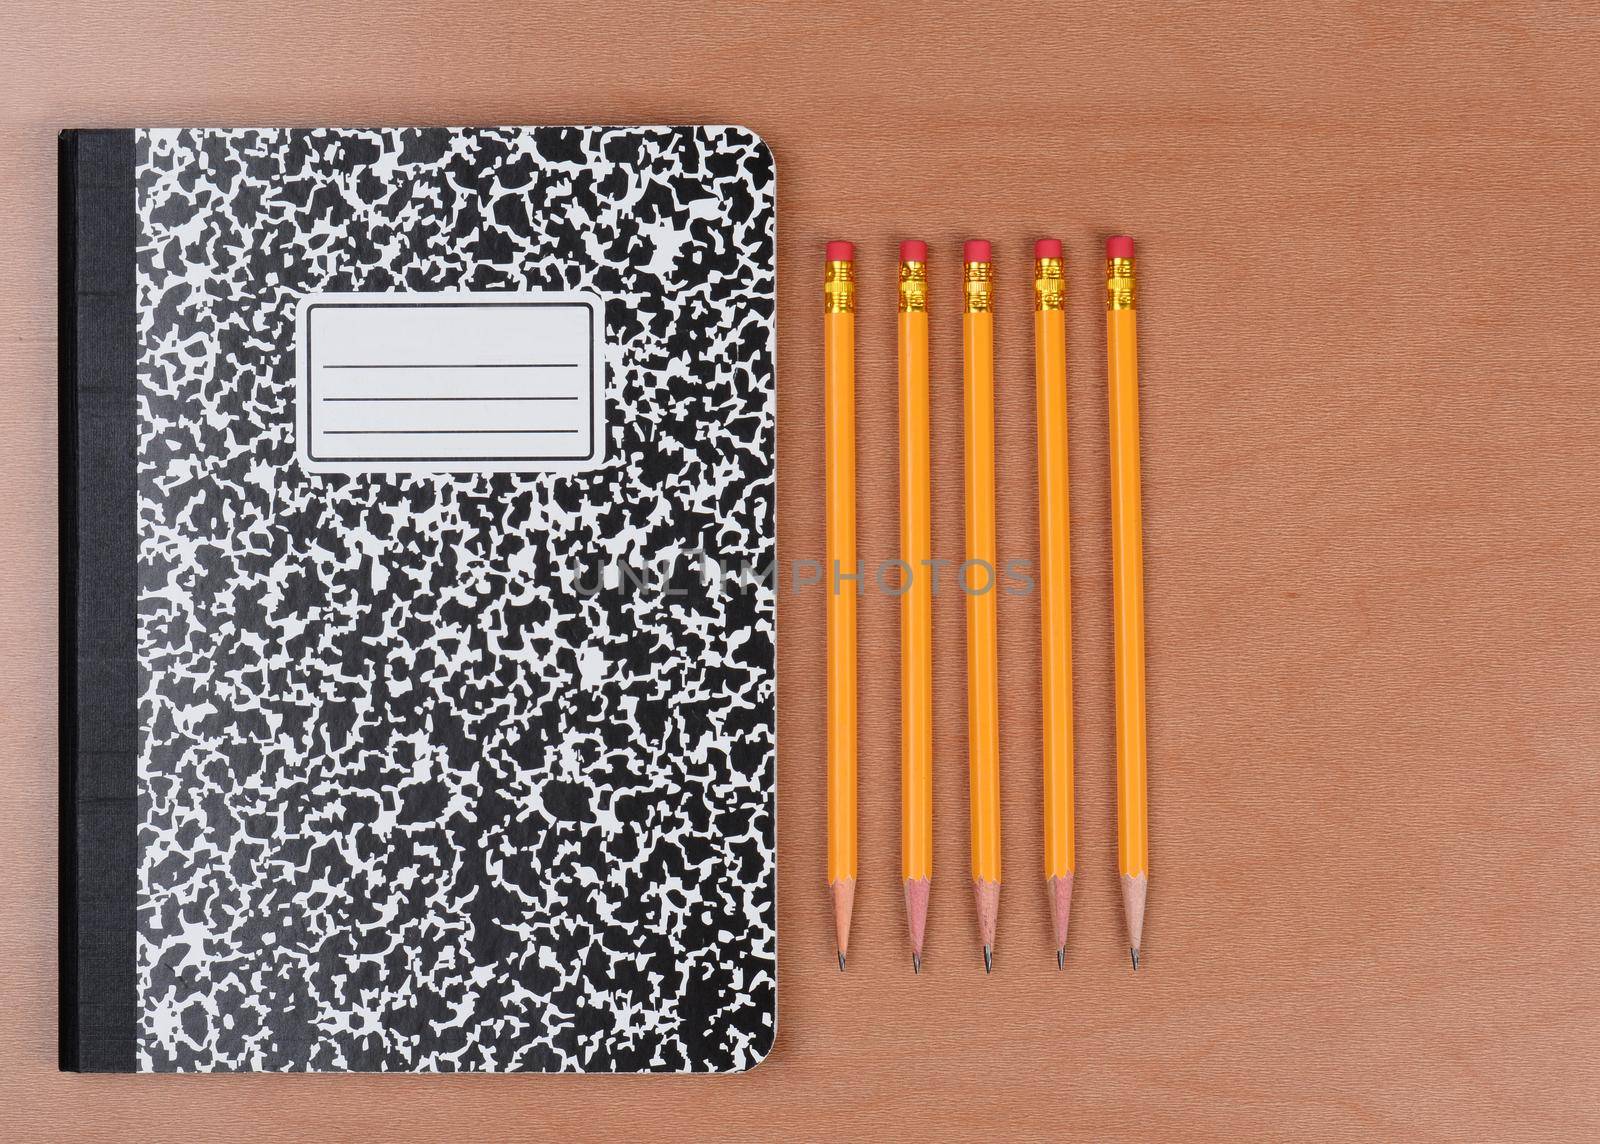 Pencils and Theme Book by sCukrov